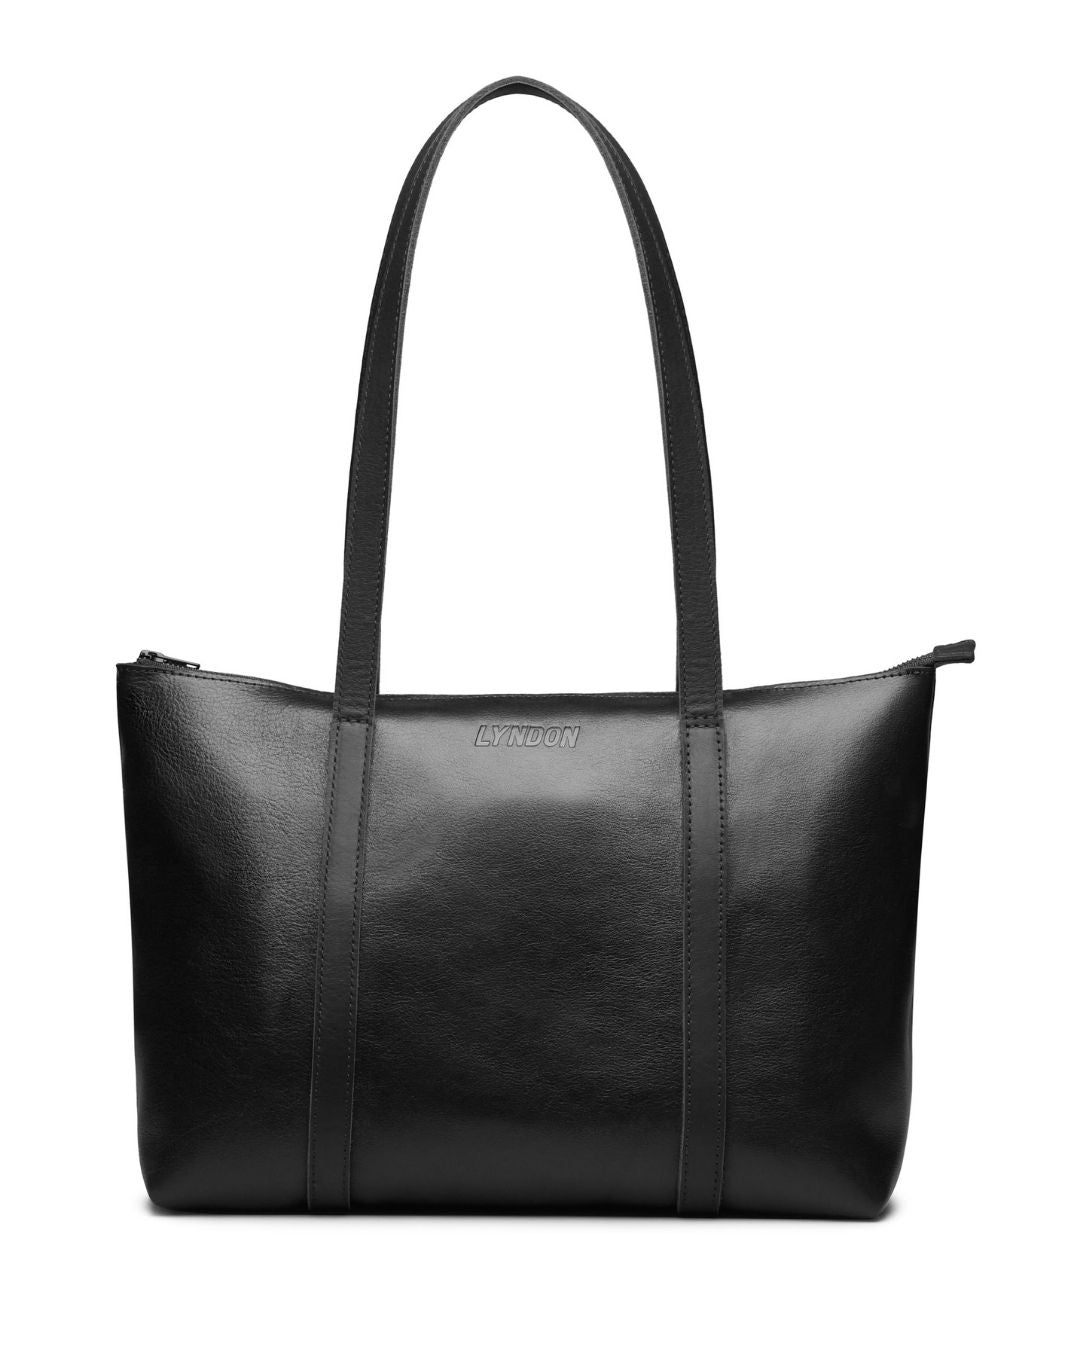 The Archetypal | Leather Tote Crocodile | Women's Big Leather Tote (Black)  - ClutchToteBags.com